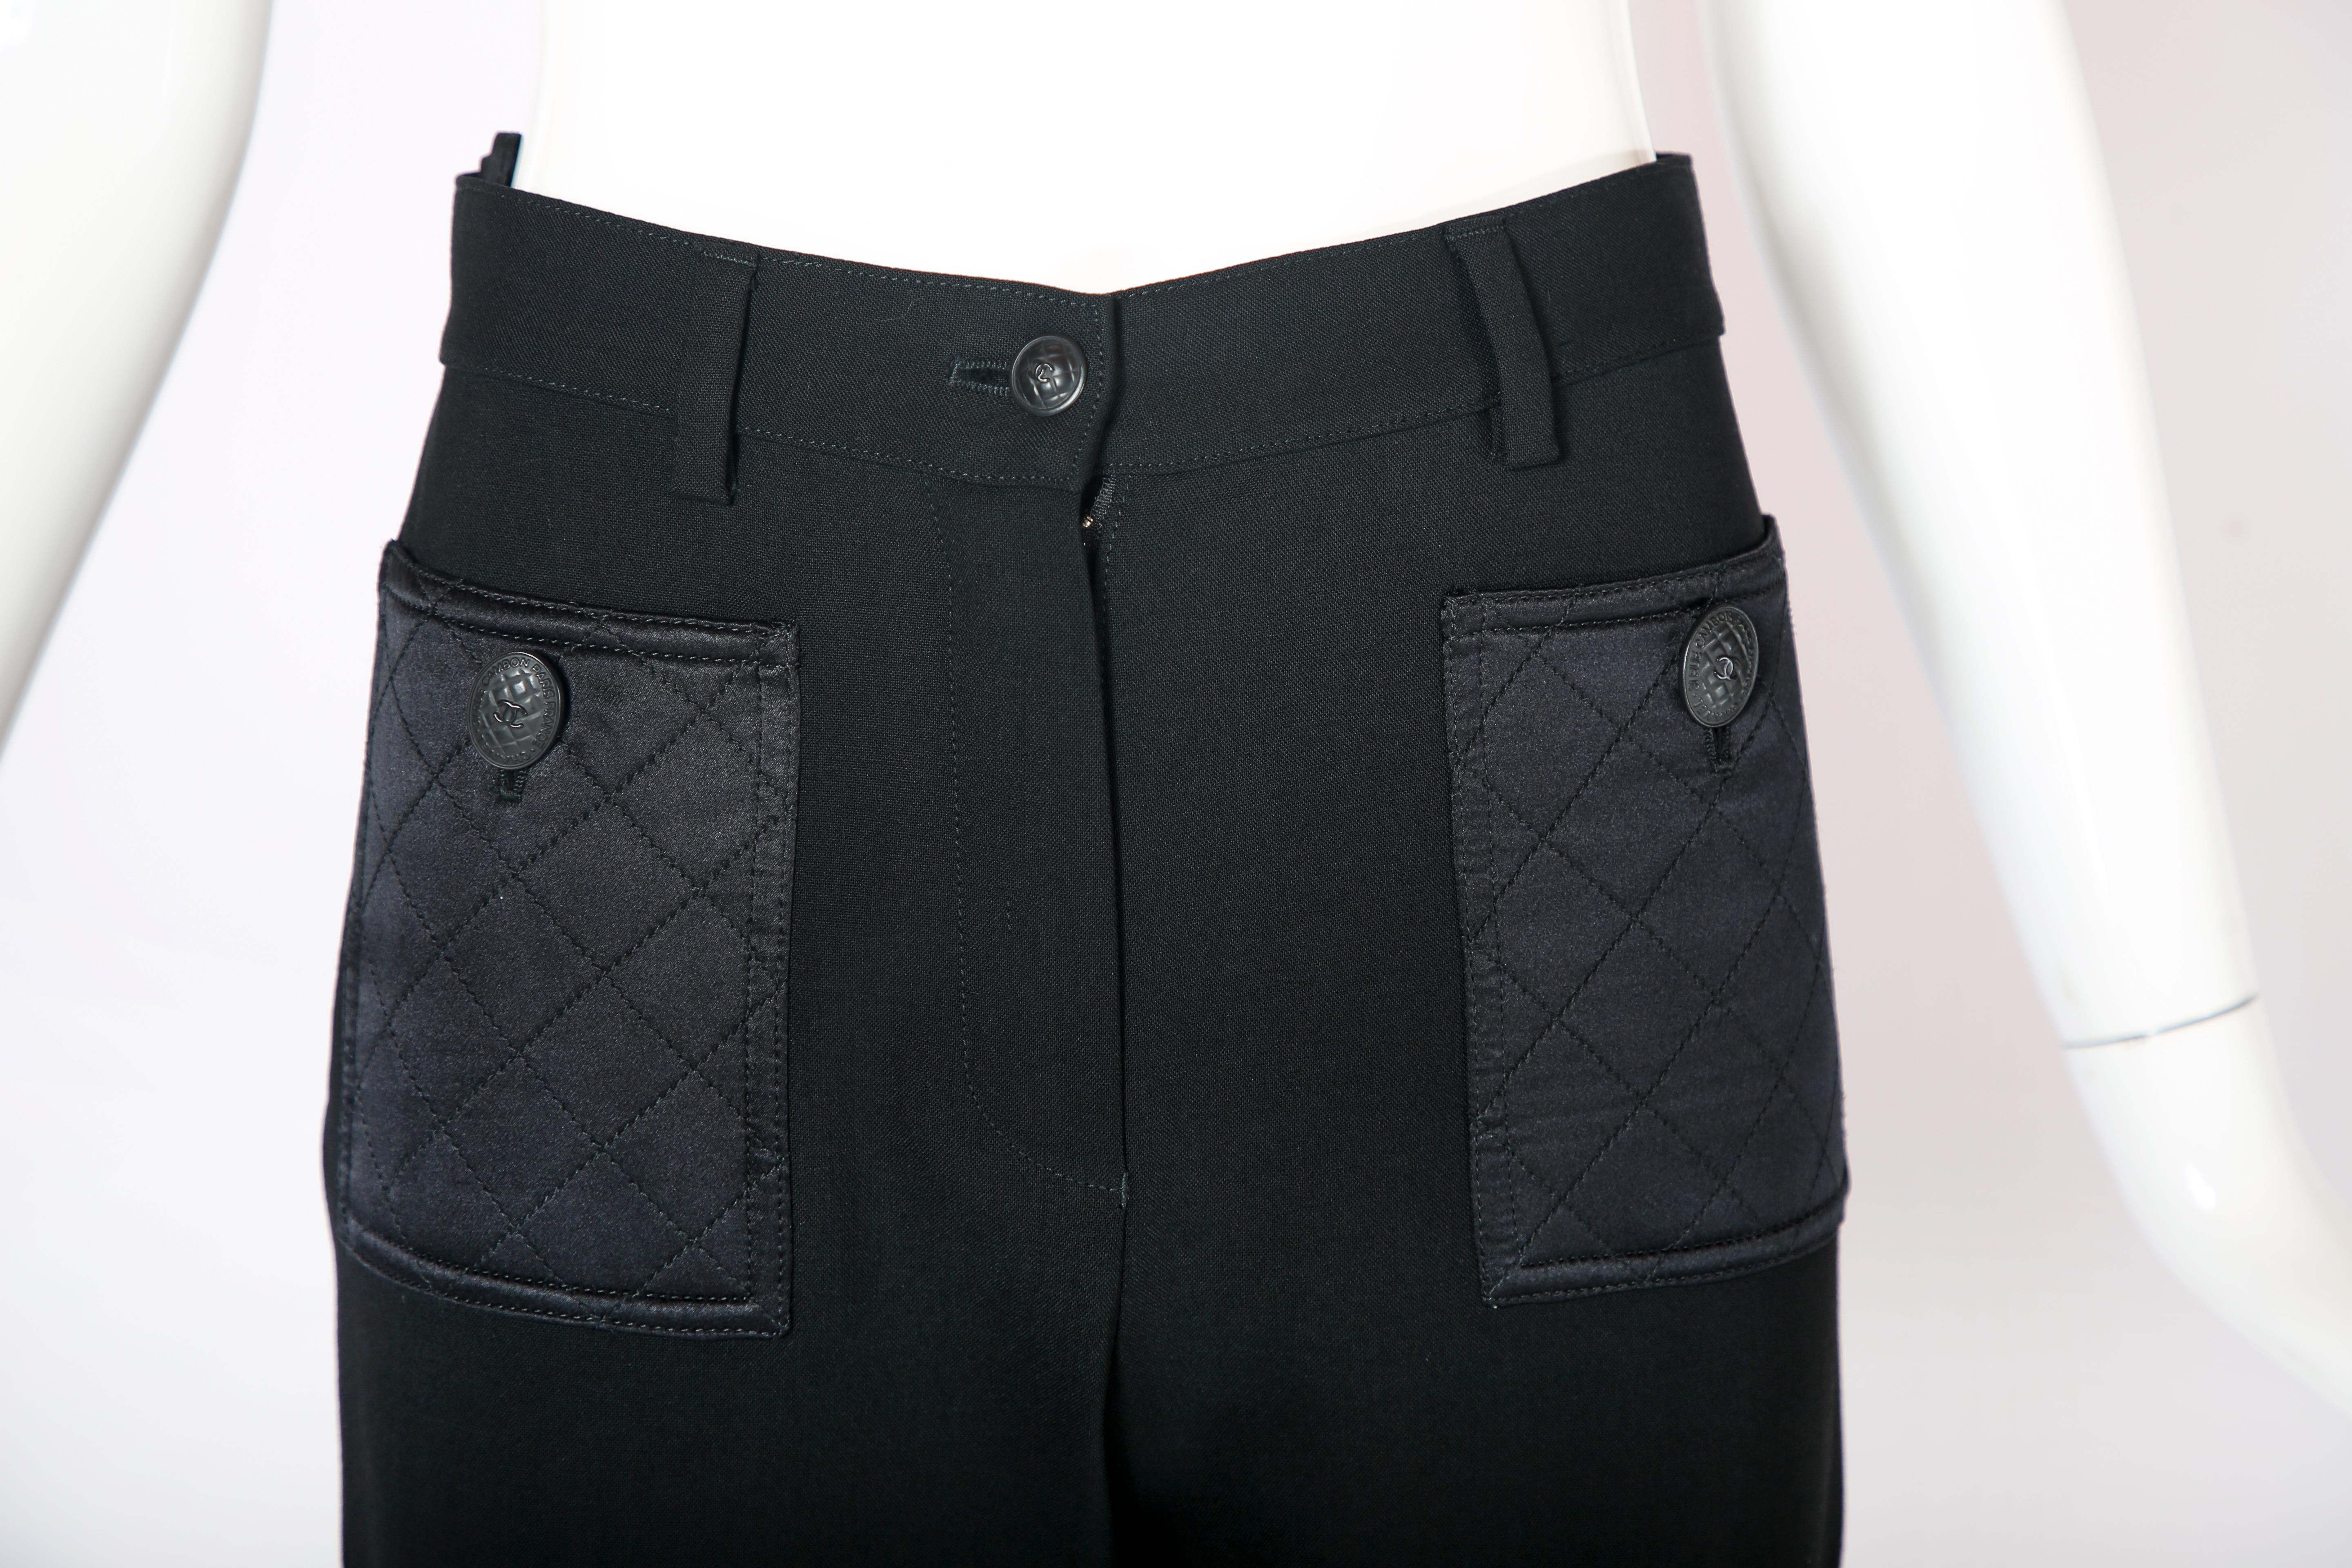 Women's 2004 A/H Chanel Black Wool Stretch Pants w/Quilted Satin Hip Pockets For Sale